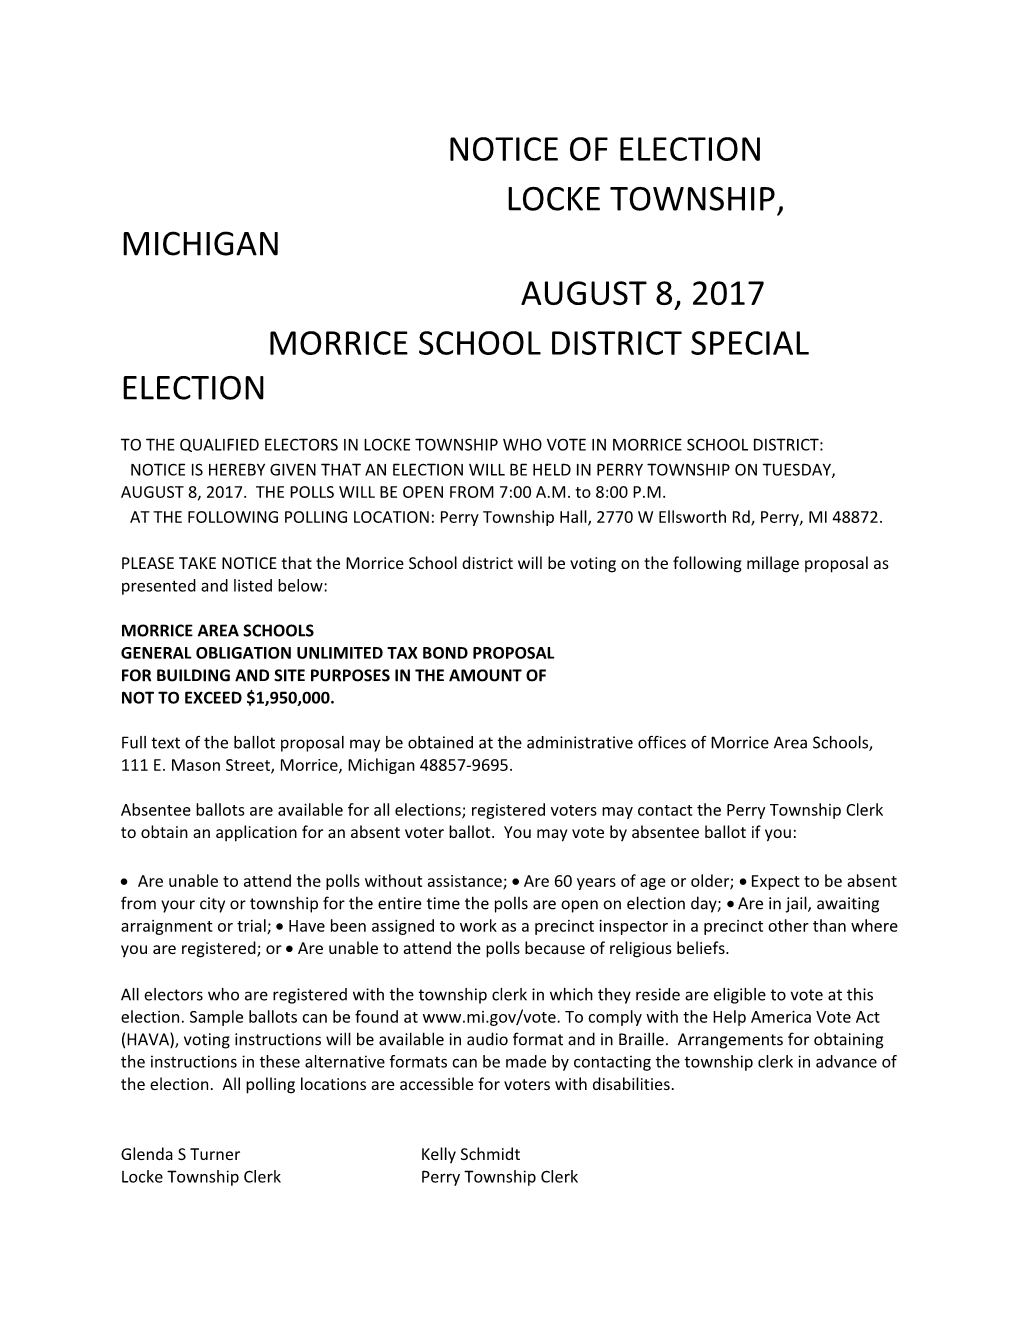 Morrice School District Special Election